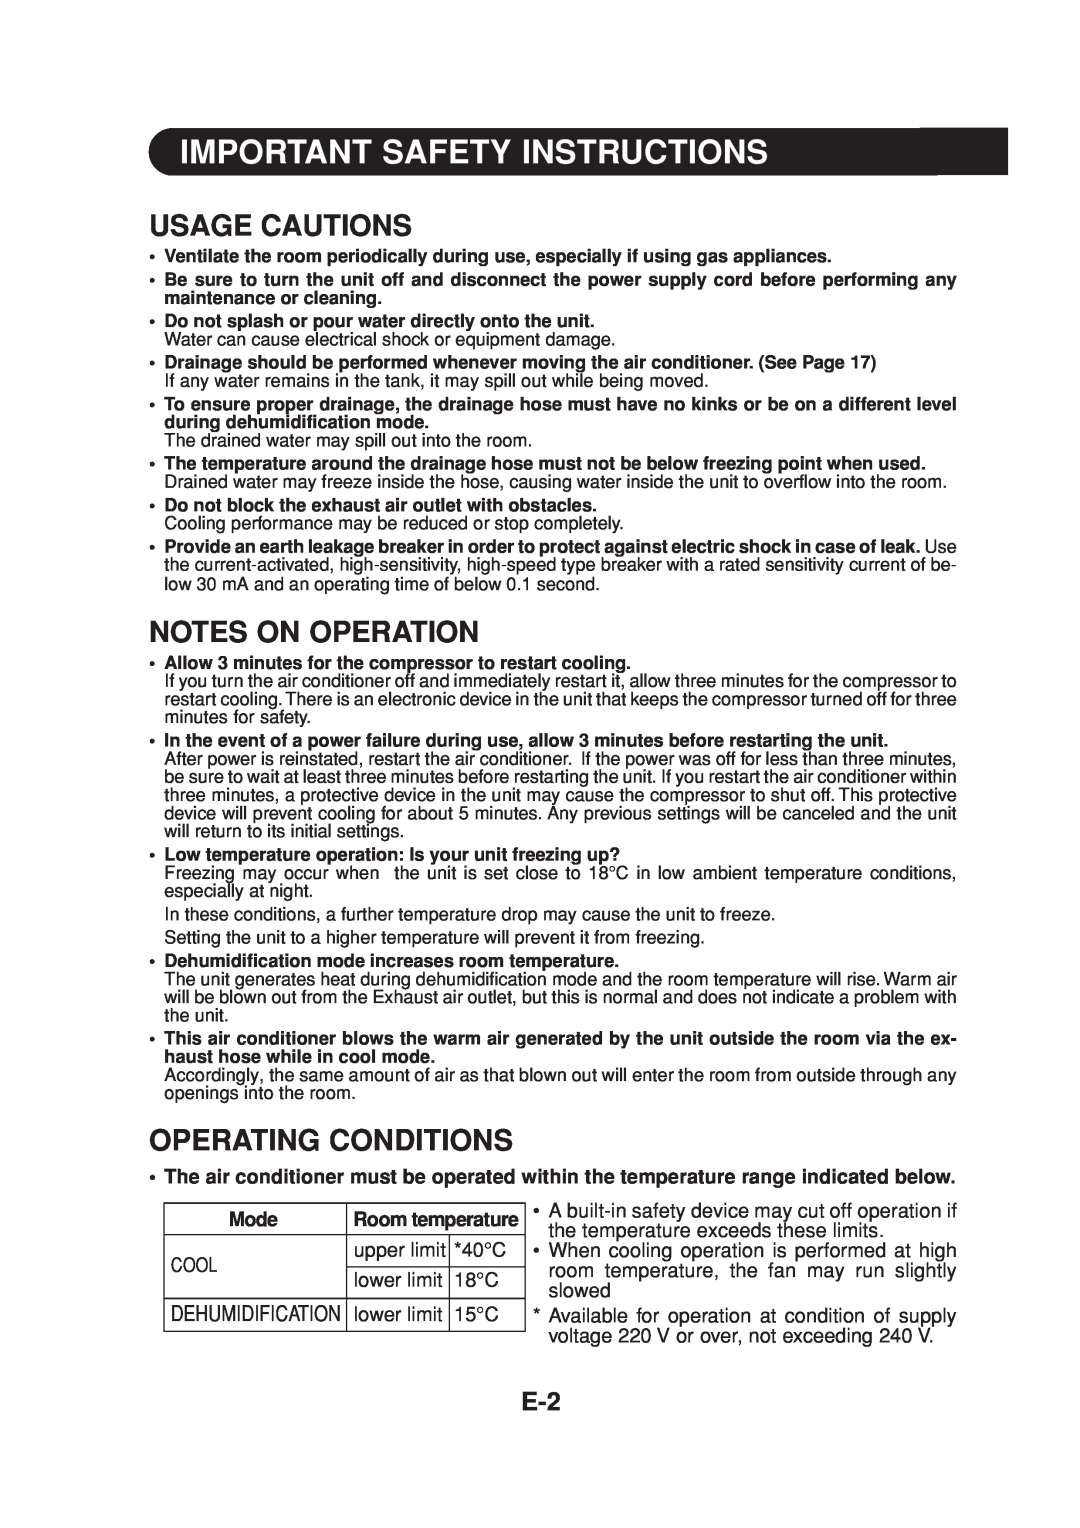 Sharp CV-P09FR operation manual Usage Cautions, Notes On Operation, Operating Conditions, Important Safety Instructions 